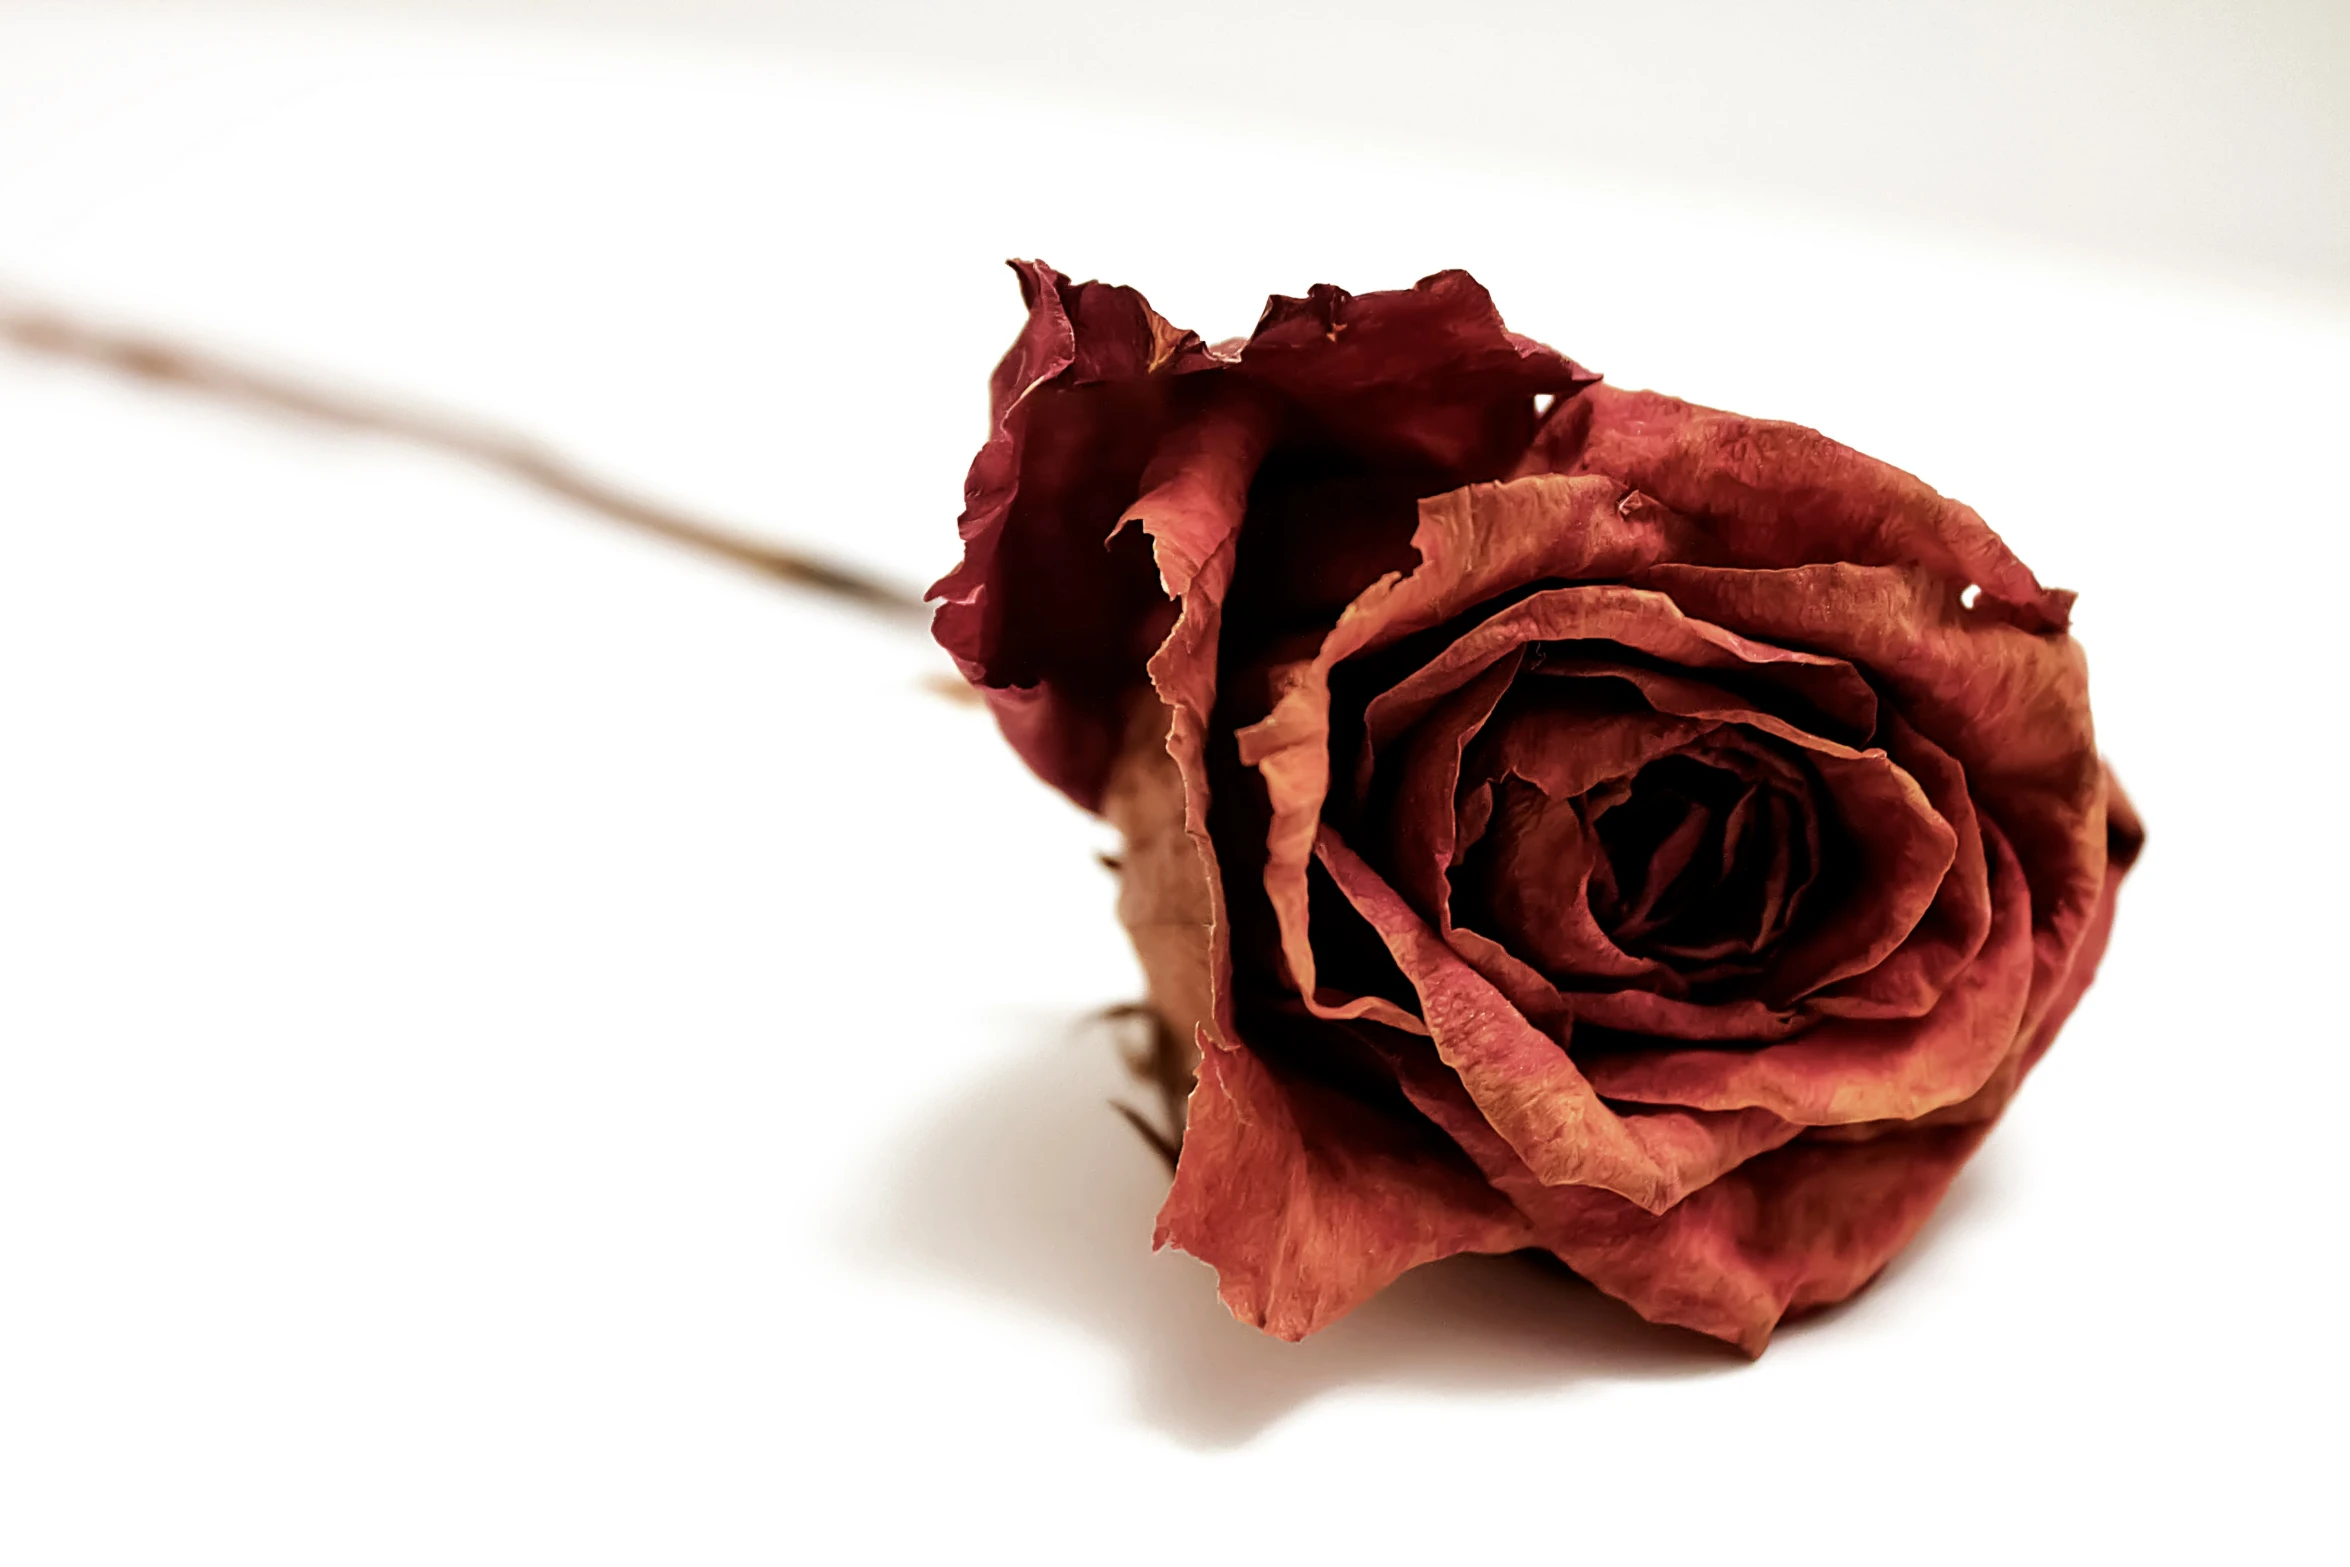 red rose sitting on white surface with long stem